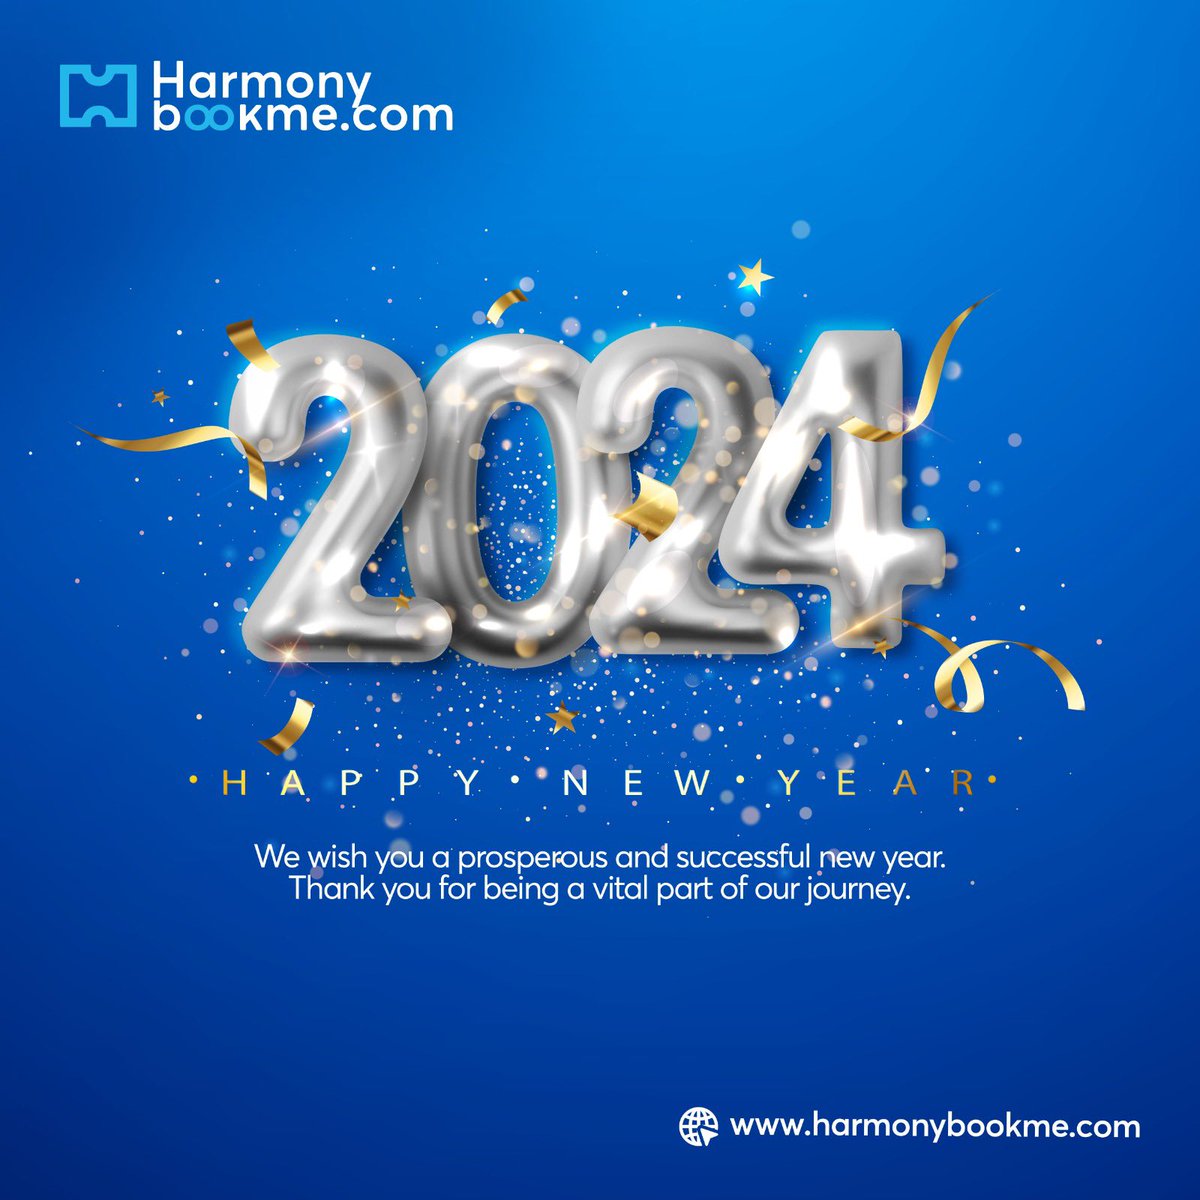 WELCOME TO THE YEAR 2️⃣0️⃣2️⃣4️⃣

FROM ALL OF US @harmonybookme 

MAY THIS BE YOUR BEST YEAR YET.

For More Details Contact us on 08182012345, 08137653926.

#harmonybookme#harmonygroupng#booksmarter#carrentalbooking #rentacar#shortletapartment#luxurylifestyle#holidaybooking